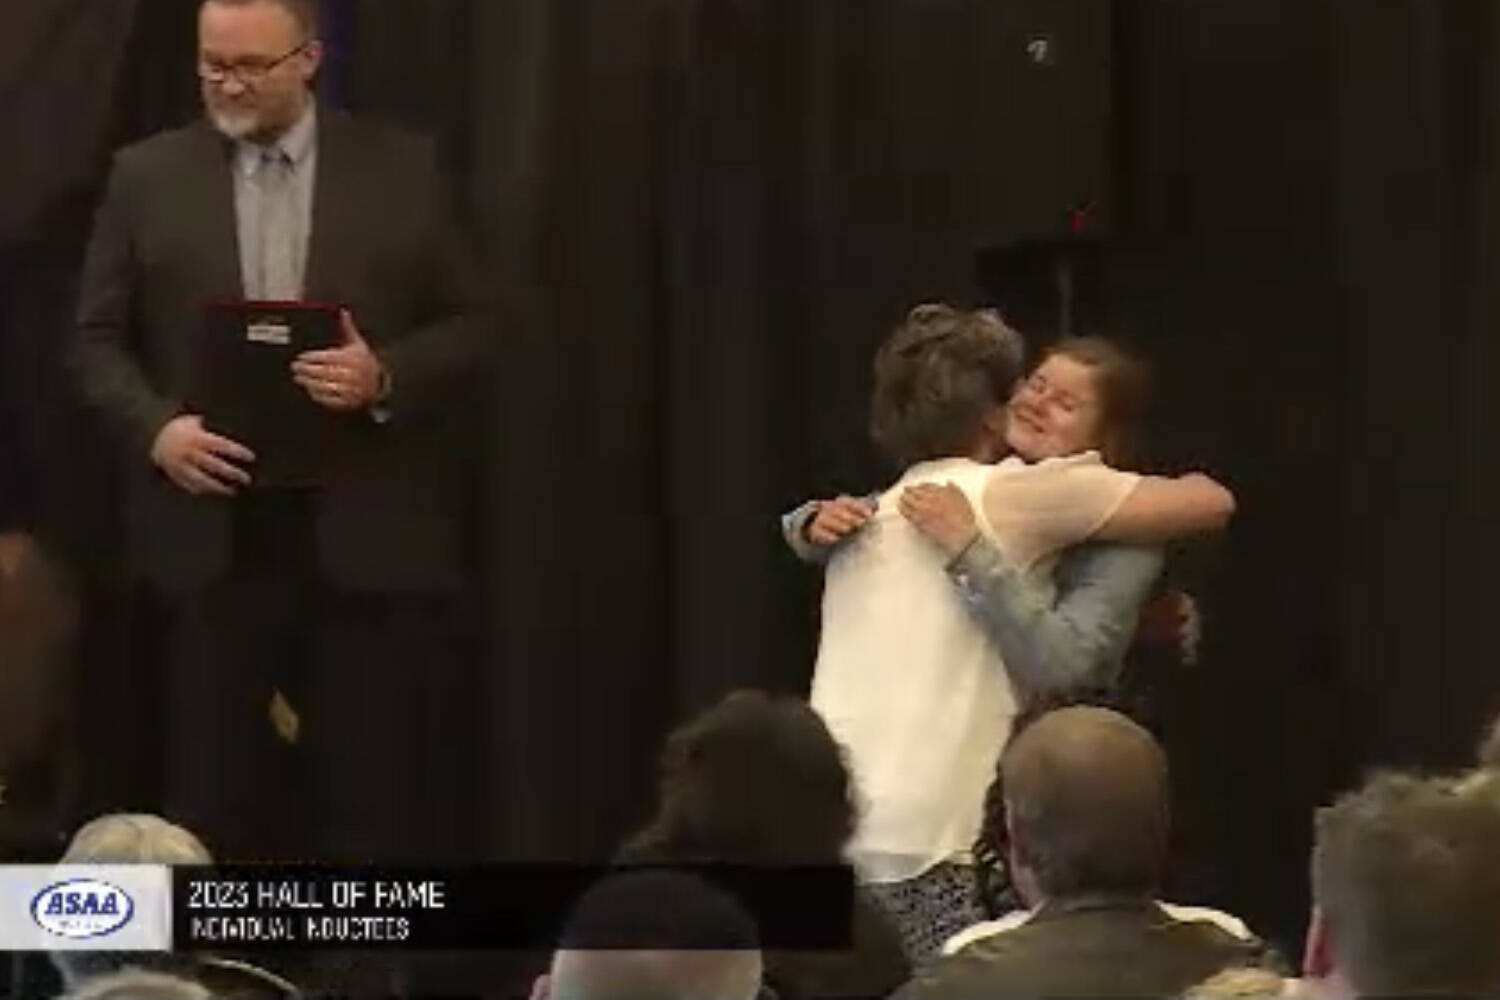 Allie Ostrander and Stacia Rustad share an embrace at the Alaska High School Hall of Fame’s Class of 2023 induction ceremony on Sunday, May 7, 2023, at The Lakefront Hotel in Anchorage, Alaska. (Screenshot)